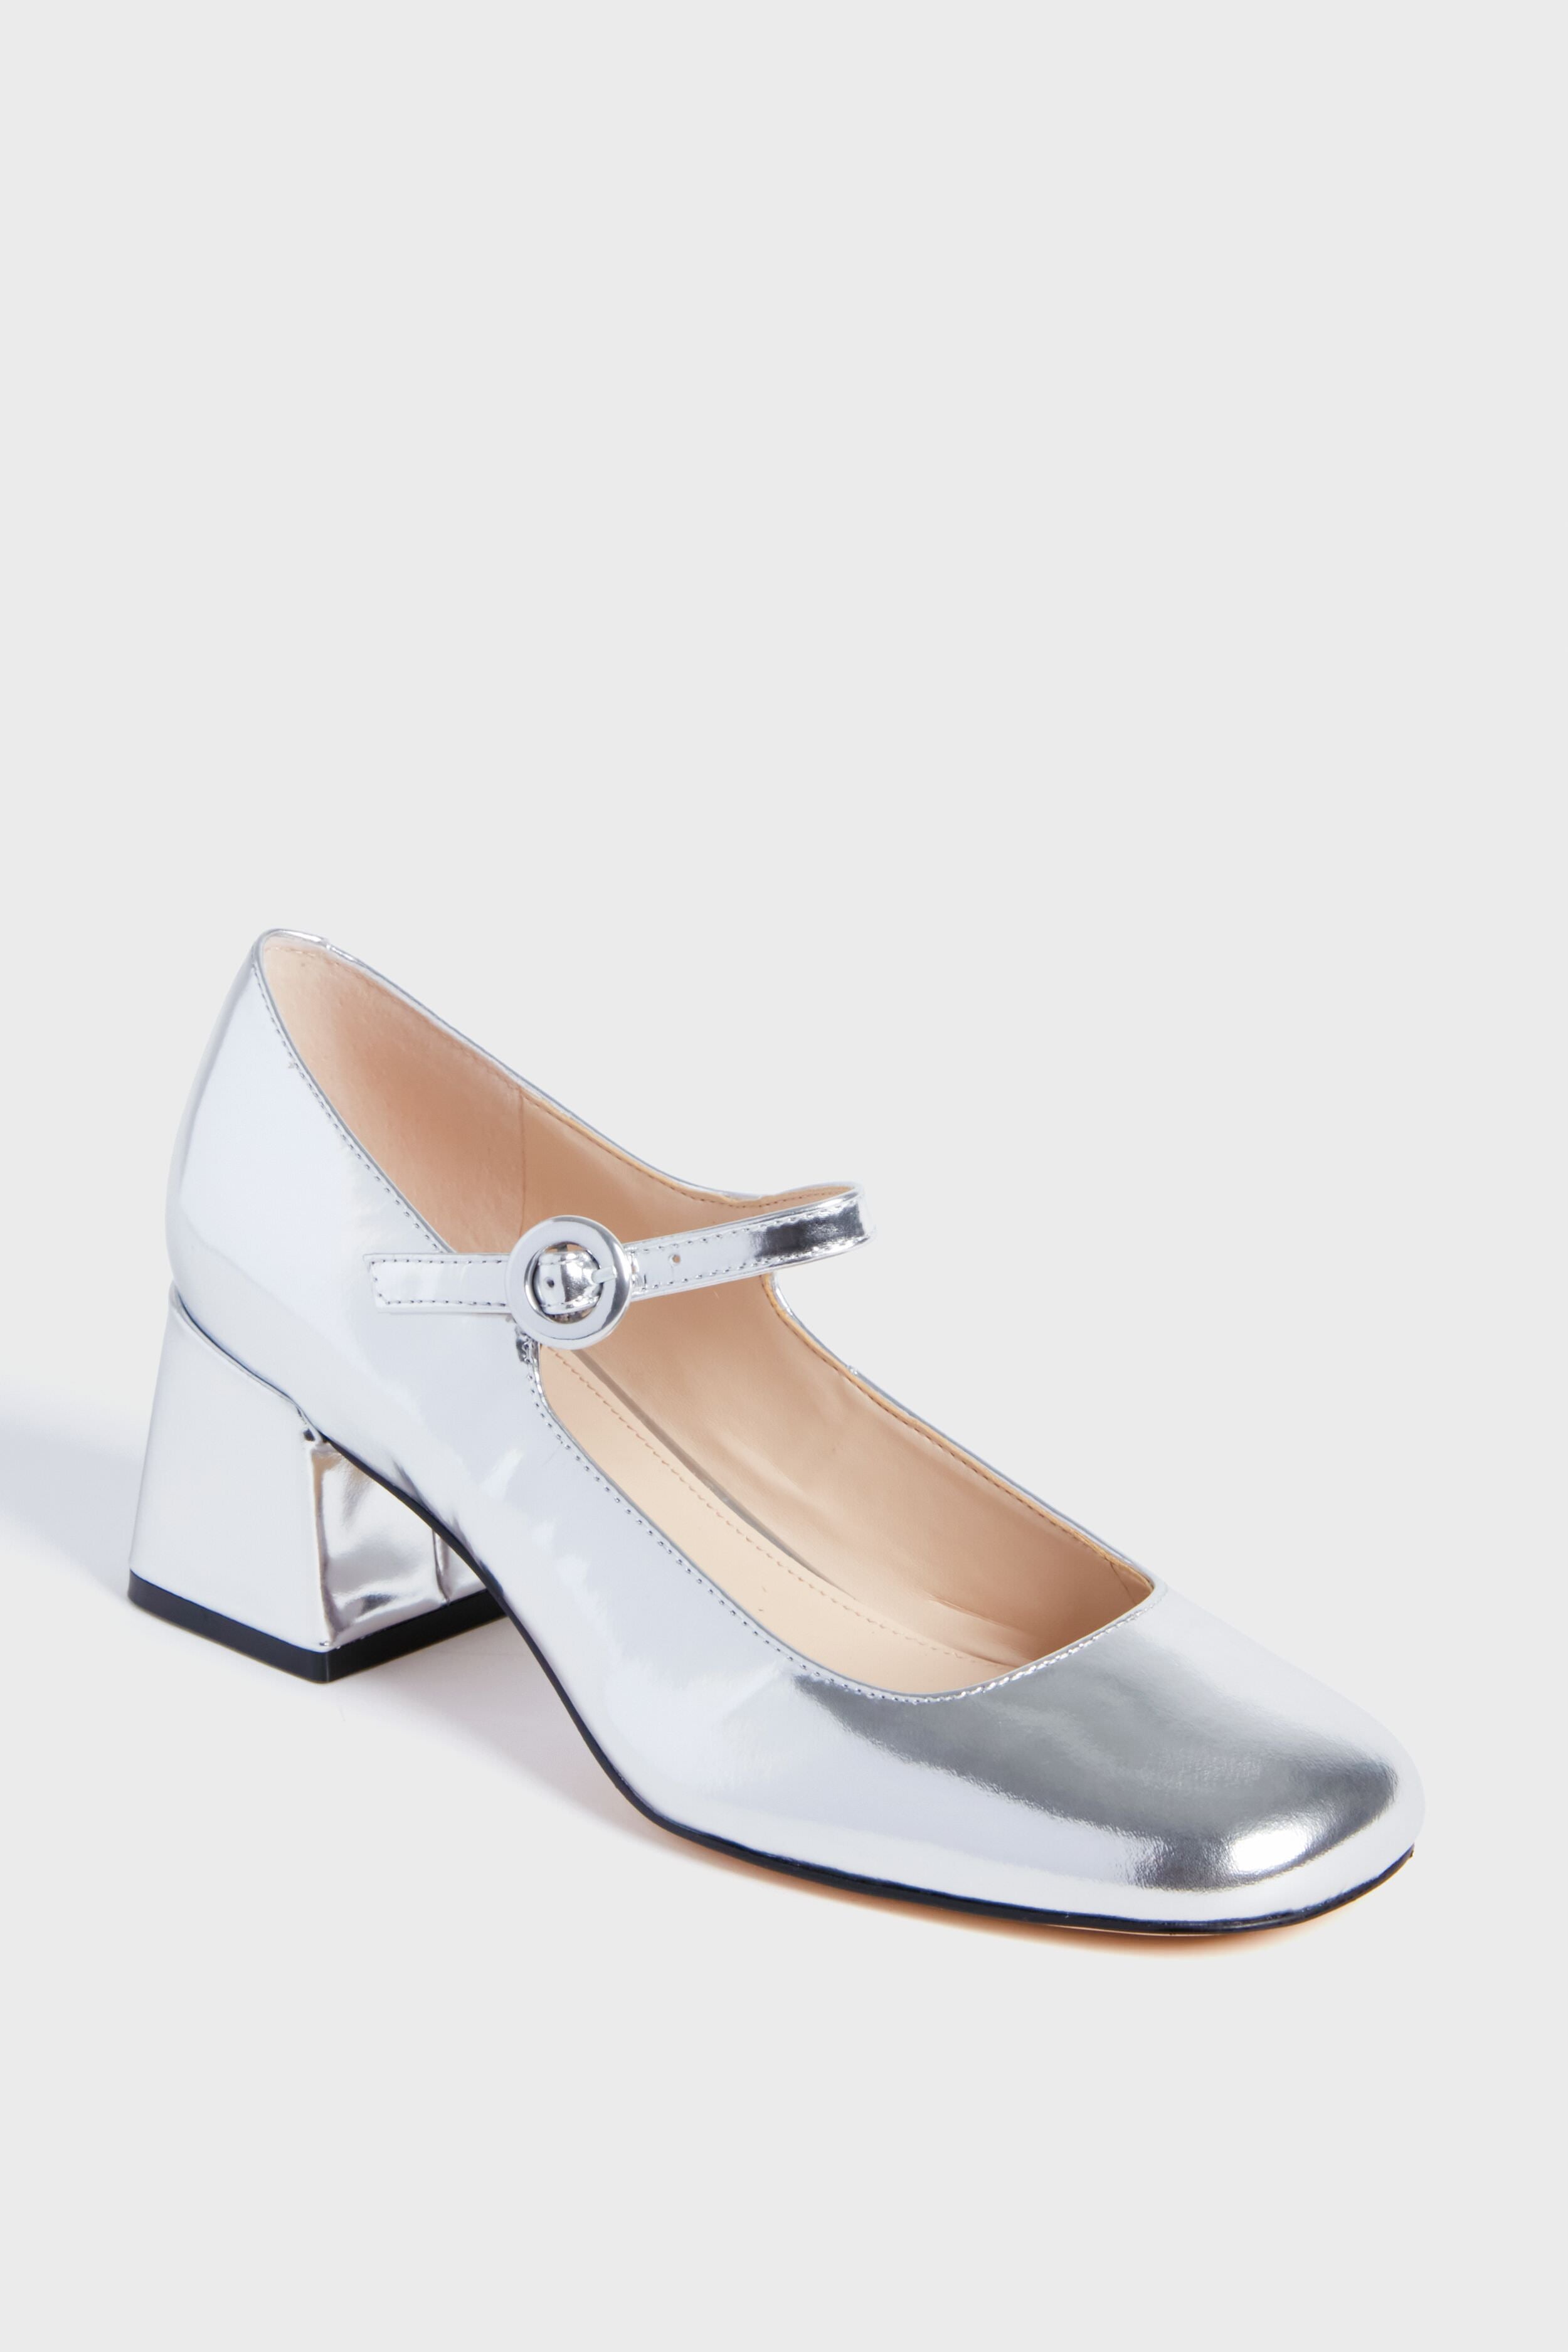 Chunky Low Block Heels for Women - Closed Toe 2 Inch Chunky Heels Flight  Attendant Shoes - Dress Pump Shoes Pointed Toe Slip On Office Shoes, Silver,  9 : Buy Online at